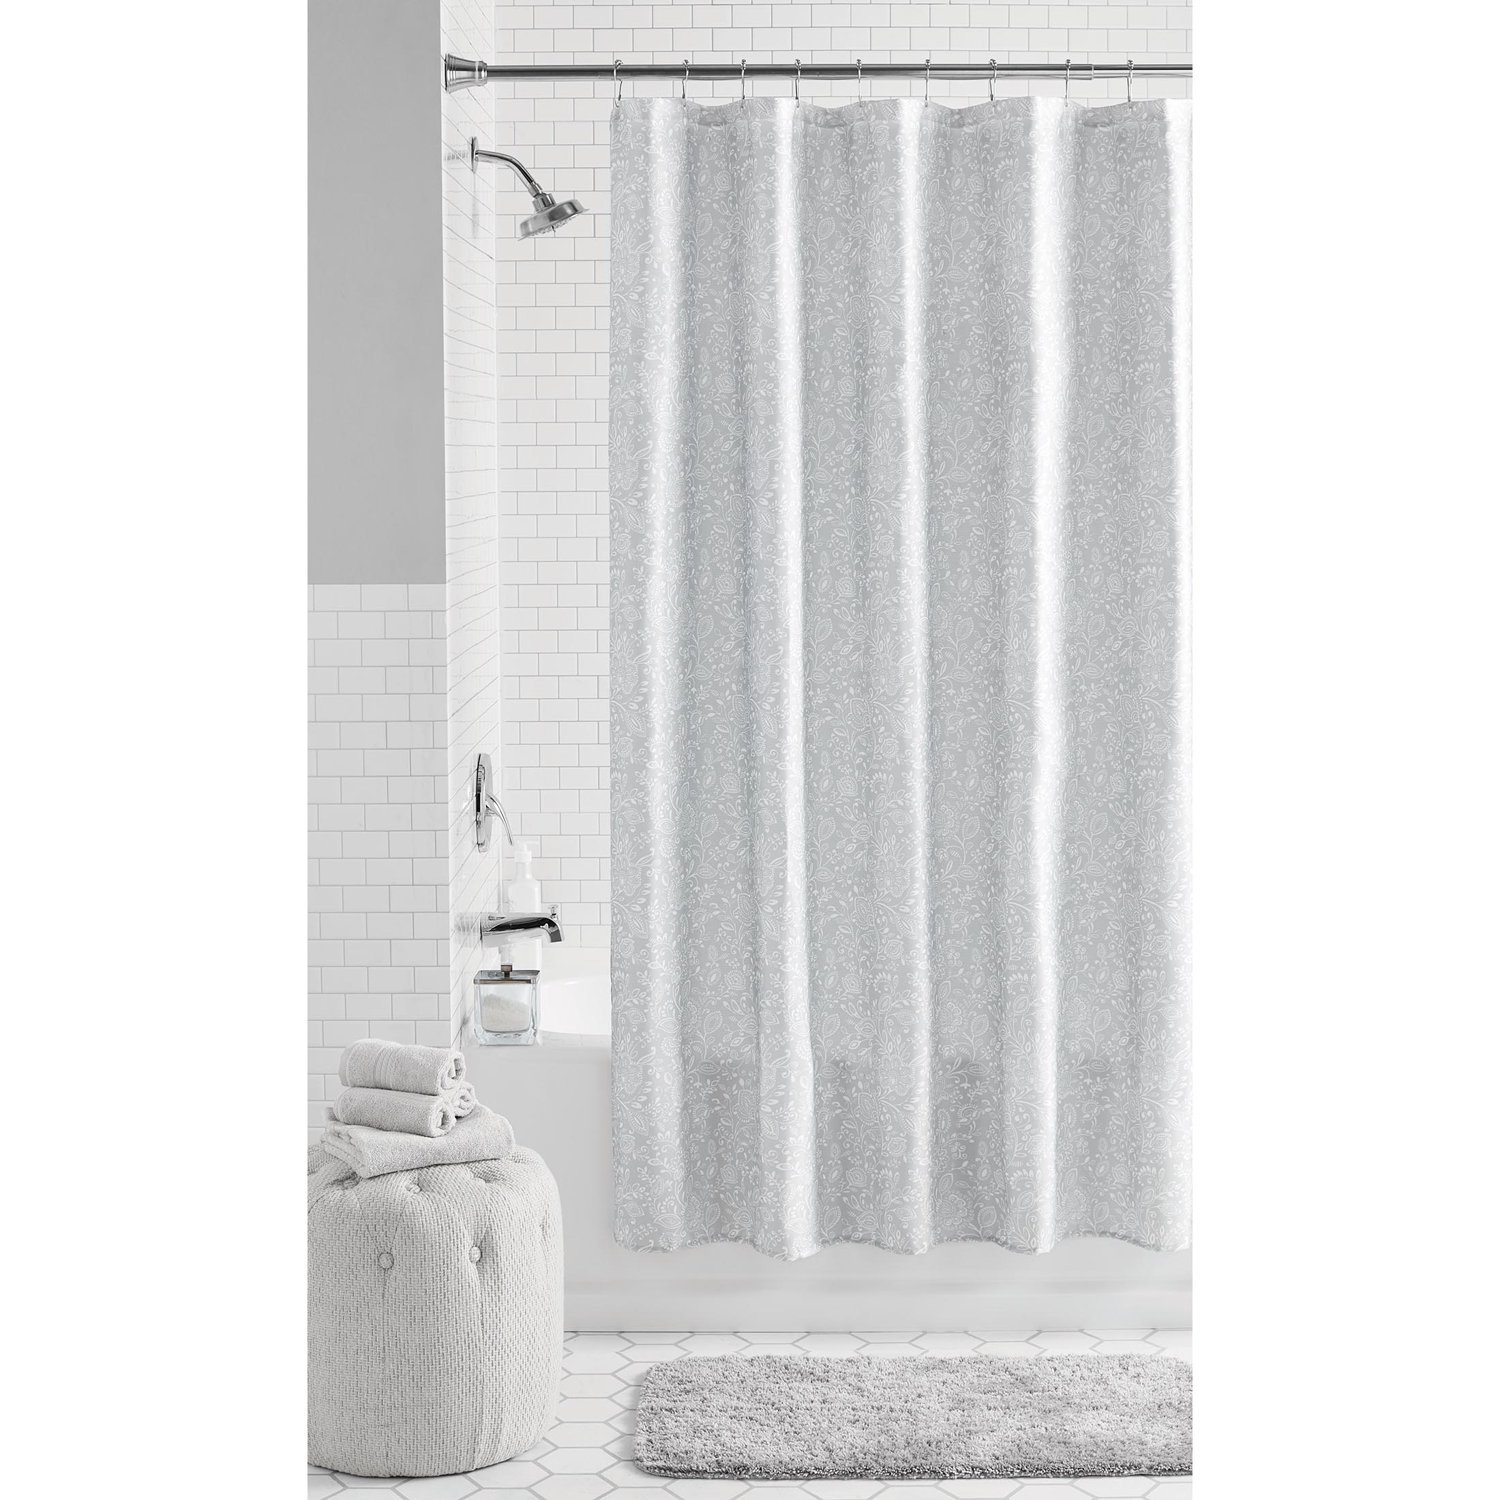 72" x 72" Mainstays Jacobean Floral Polyester Shower Curtain (Grey) $5.90  + Free S&H w/ Walmart+ or $35+